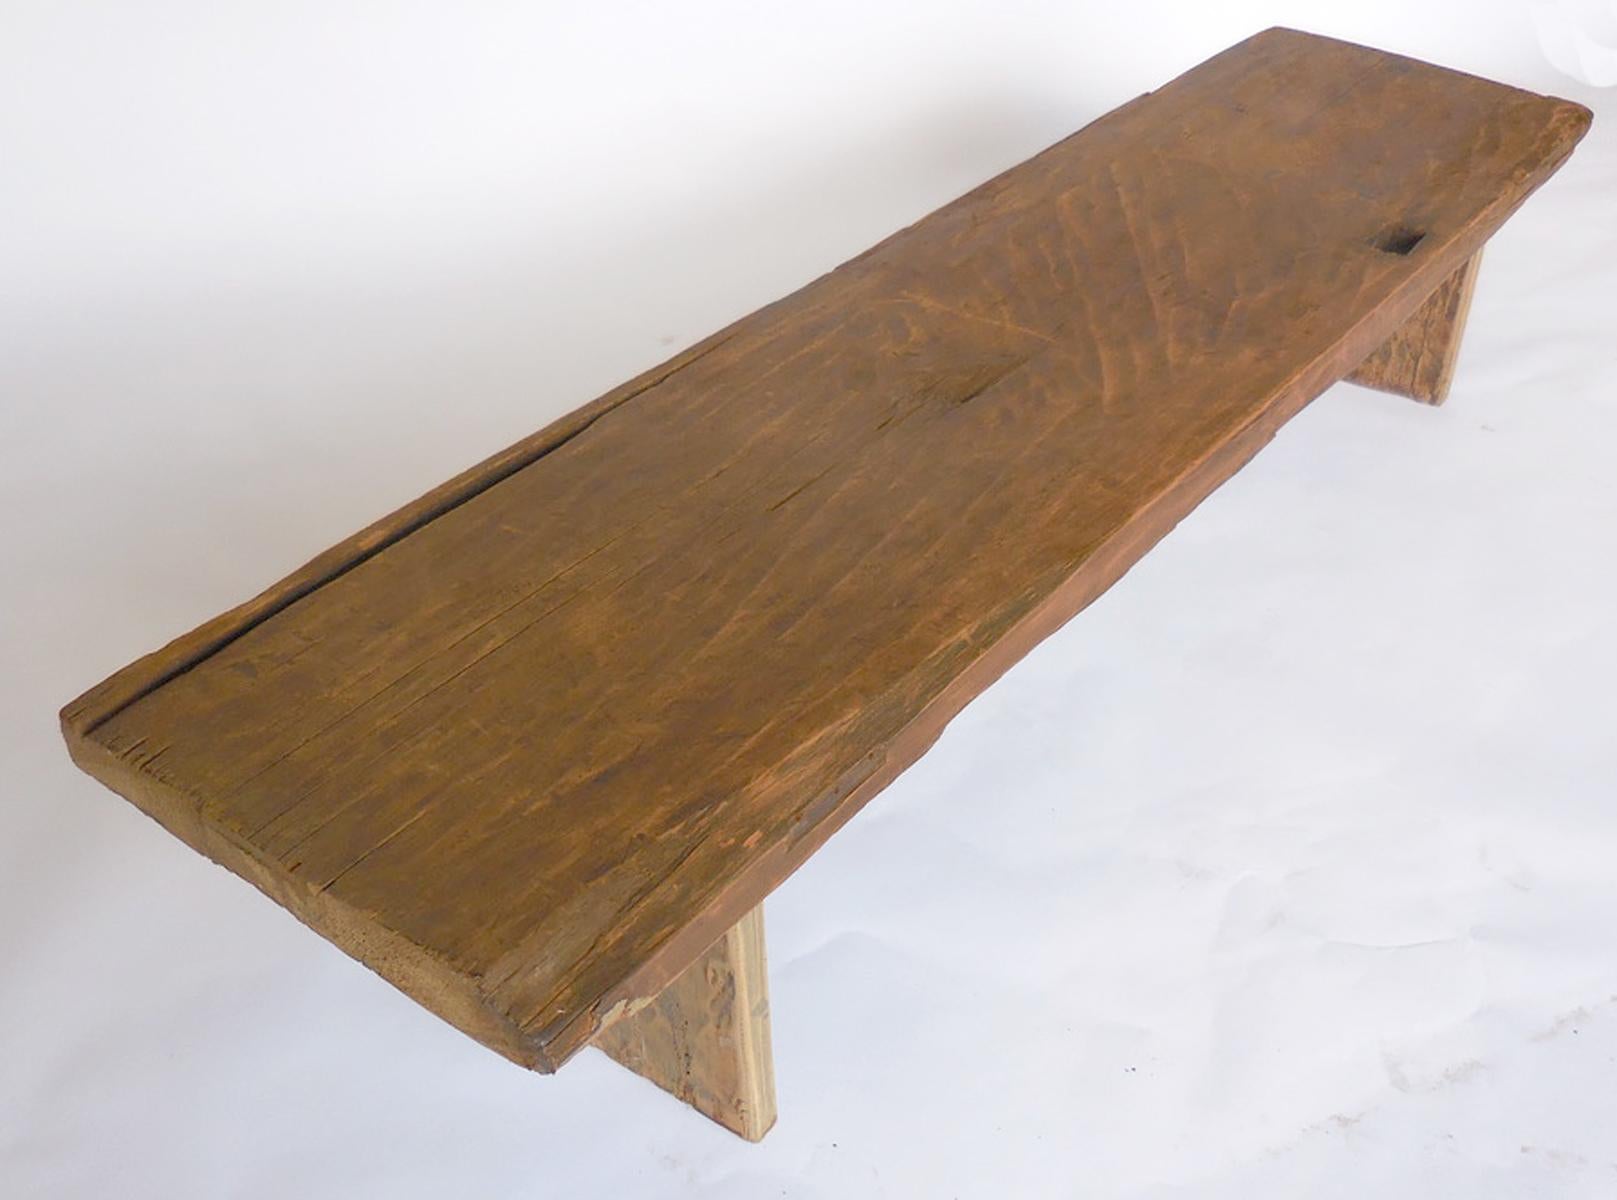 Guatemalan Antique Rustic Wooden Bench or Coffee Table